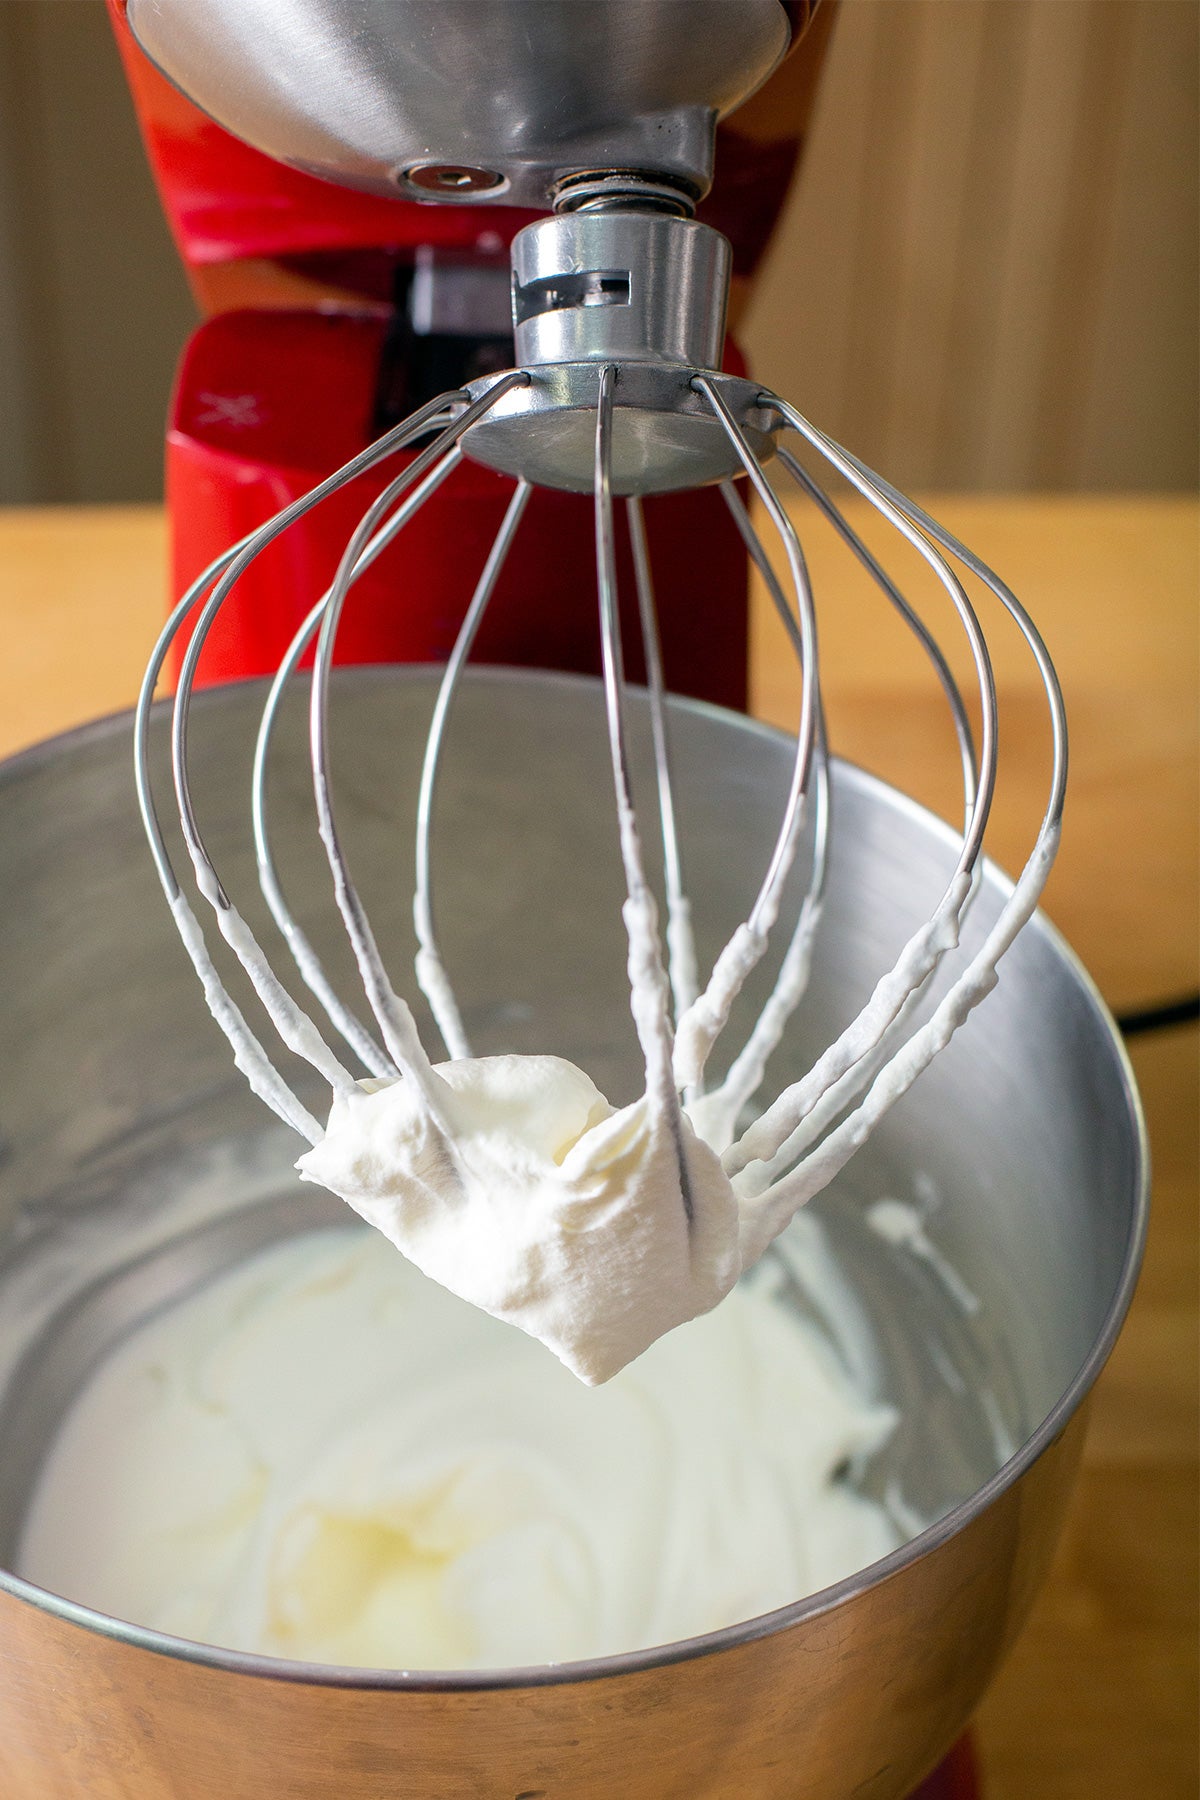 https://www.kingarthurbaking.com/sites/default/files/blog-images/2019/06/How-to-fix-whipped-cream-11.jpg